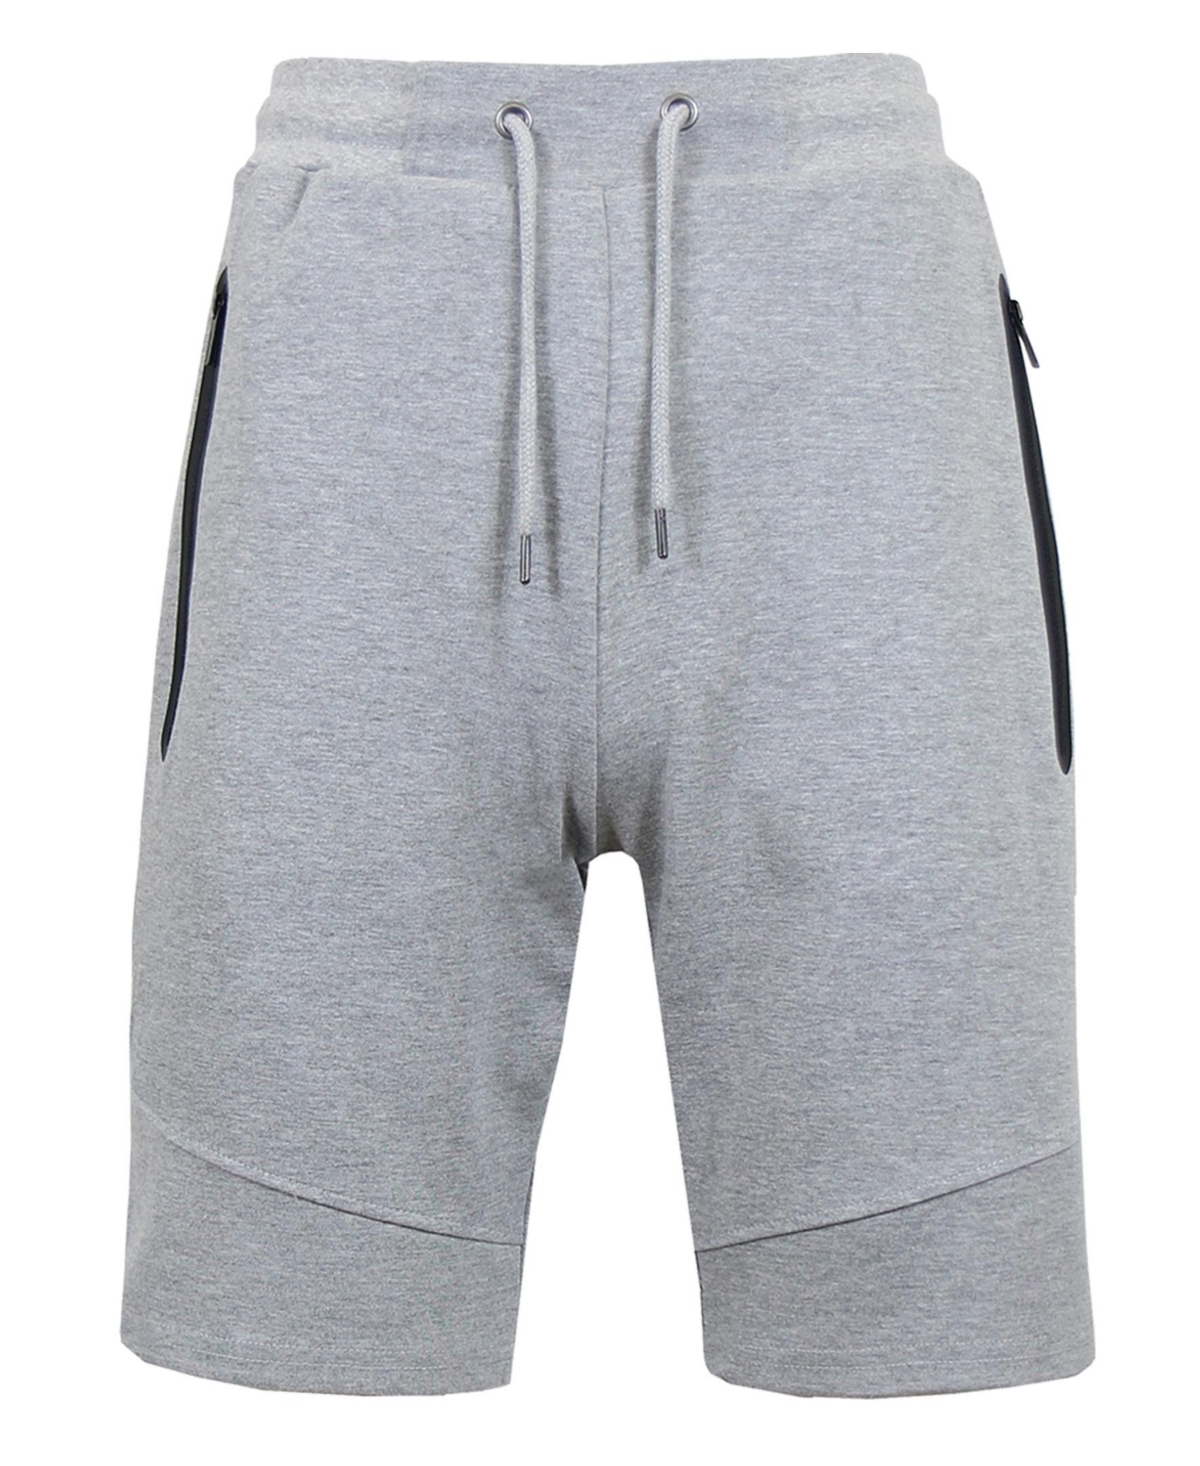 Wicked Stitch Men's Slim Fit Tech Fleece Performance Active Jogger Shorts In Heather Gray